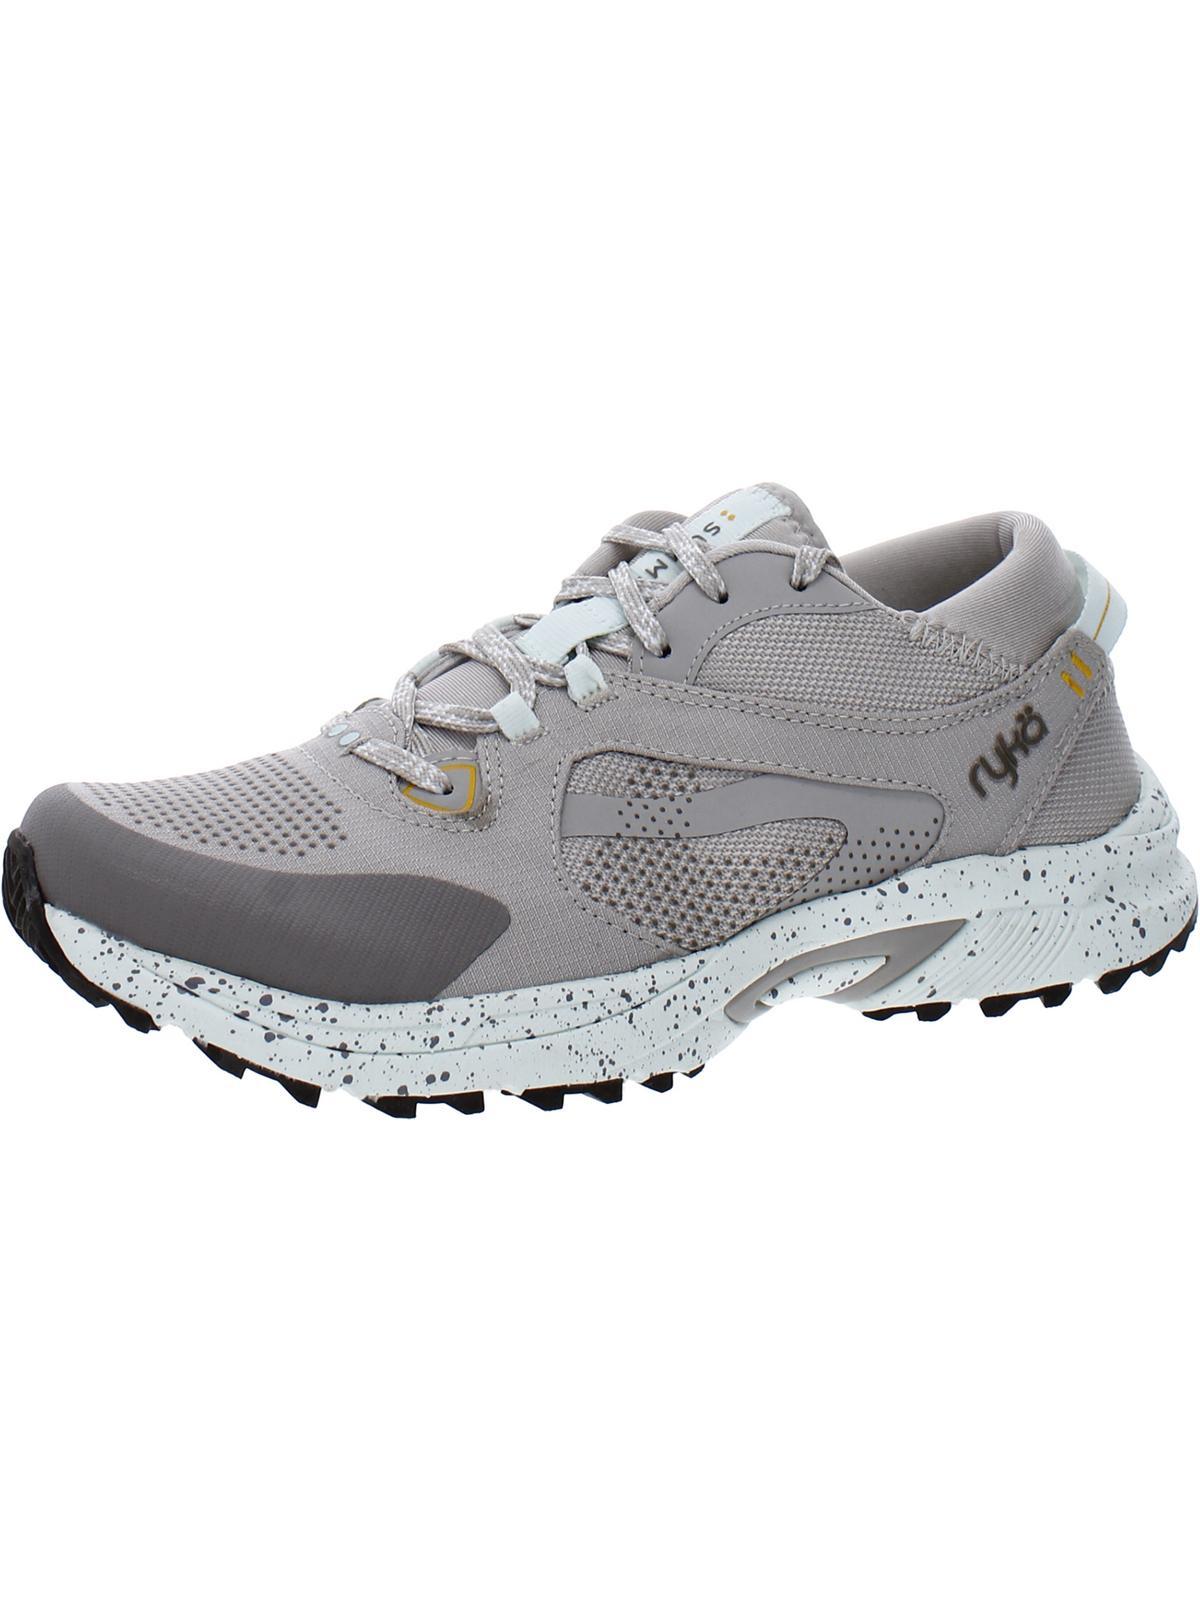 Ryka Summit Trail Fitness Workout Running Shoes in Gray | Lyst